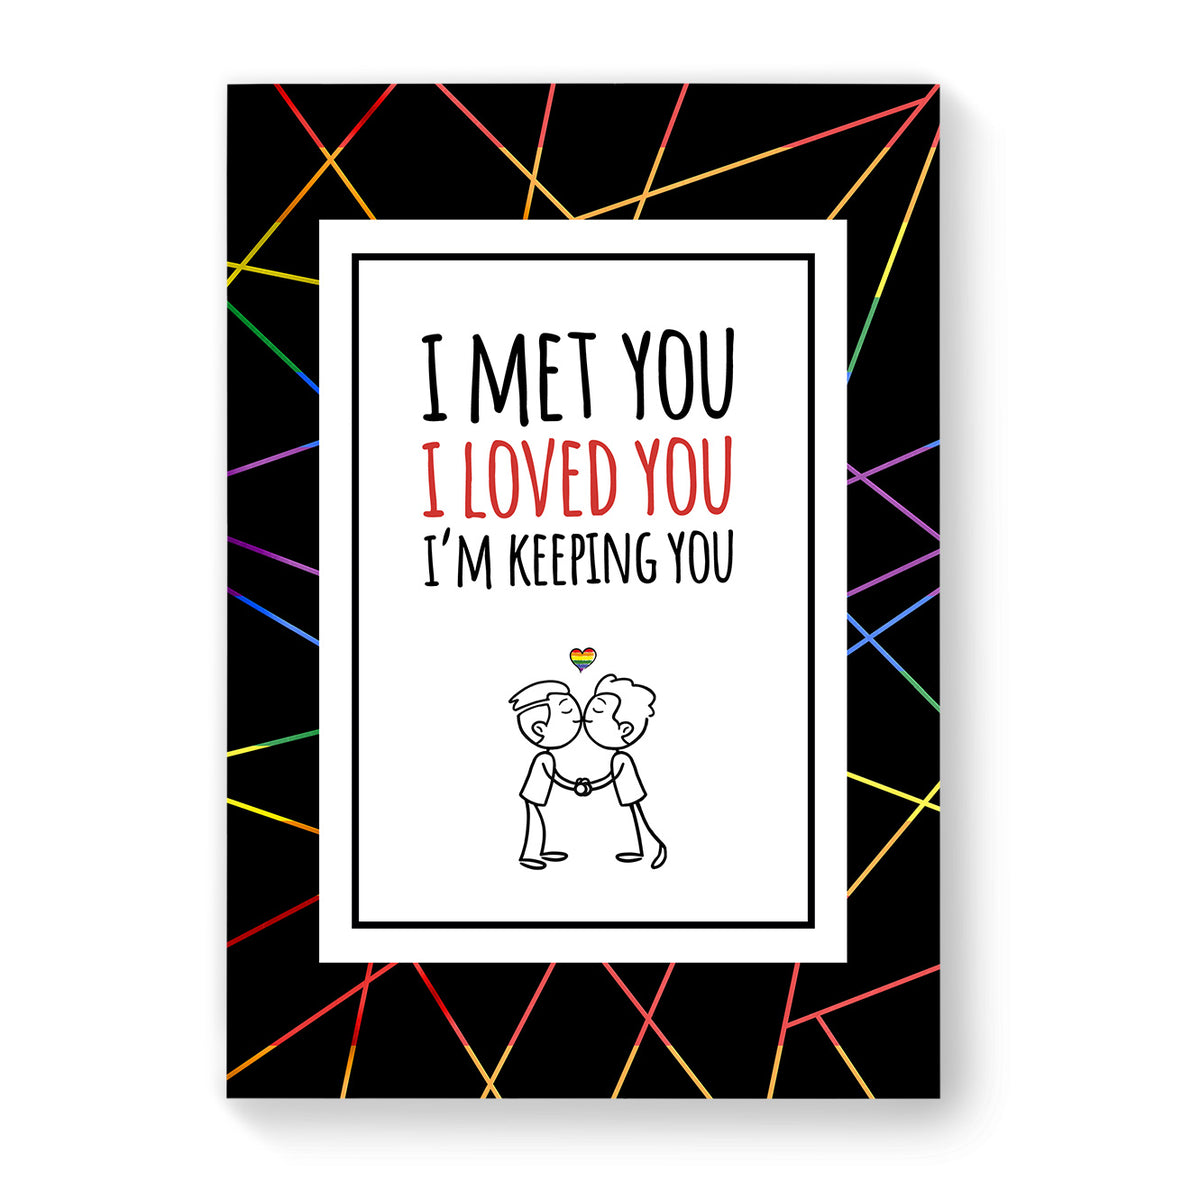 I met you, I loved you - Gay Couple Card - Black Geometric | Gift